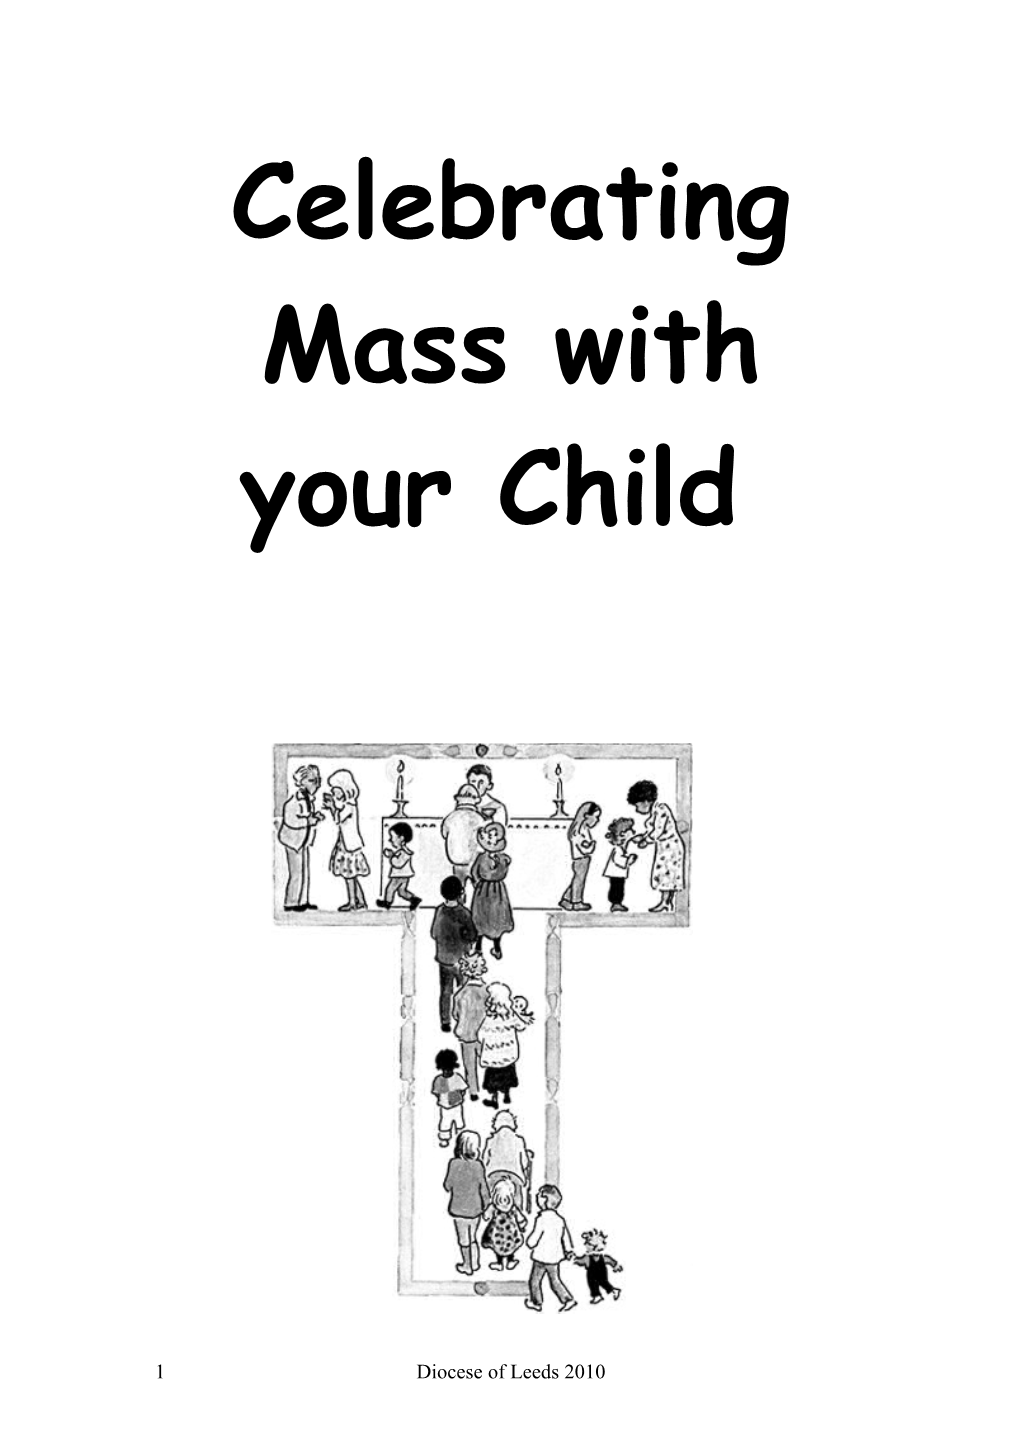 Encouraging Your Child to Celebrate Mass